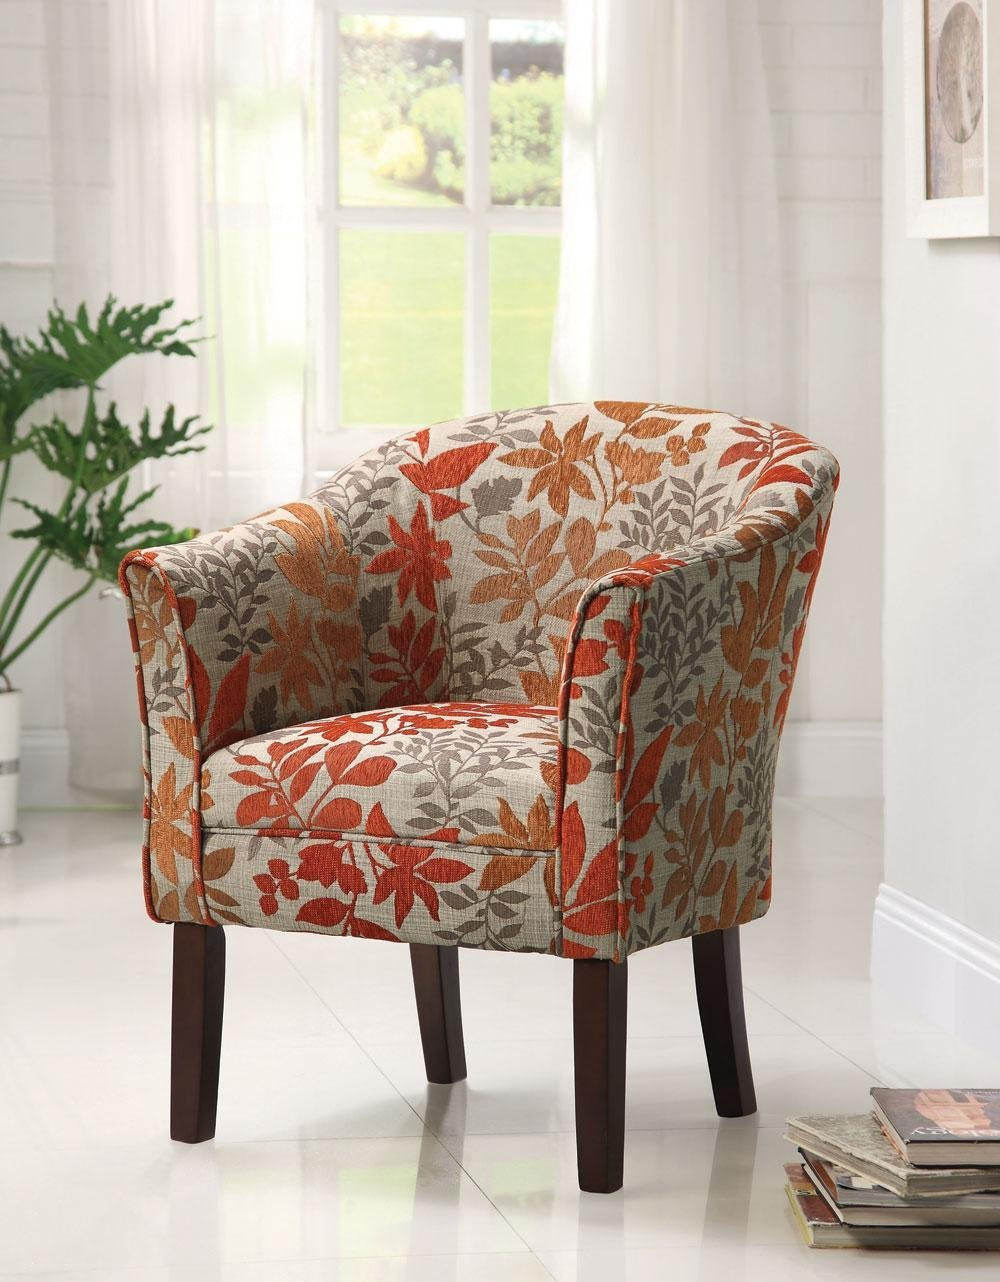 Side Chairs Living Room
 Accent chairs for living room 23 reasons to